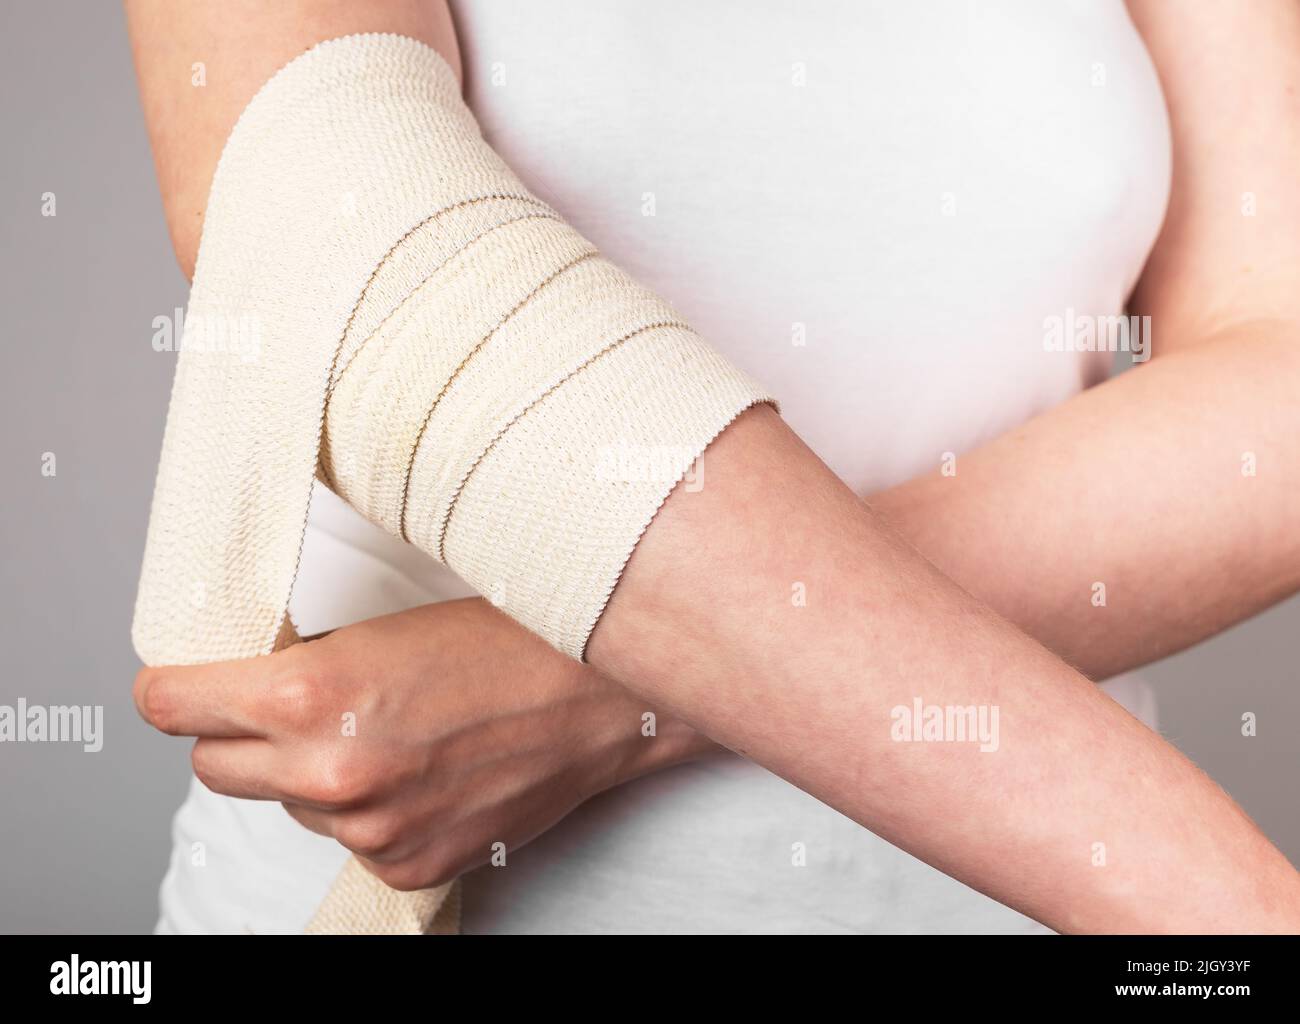 Woman wrapping compression bandage around painful elbow to relieve pain or prevent injury. Muscle sprains, strains, overuse treatment. Arm trauma. Health care concept. High quality photo Stock Photo